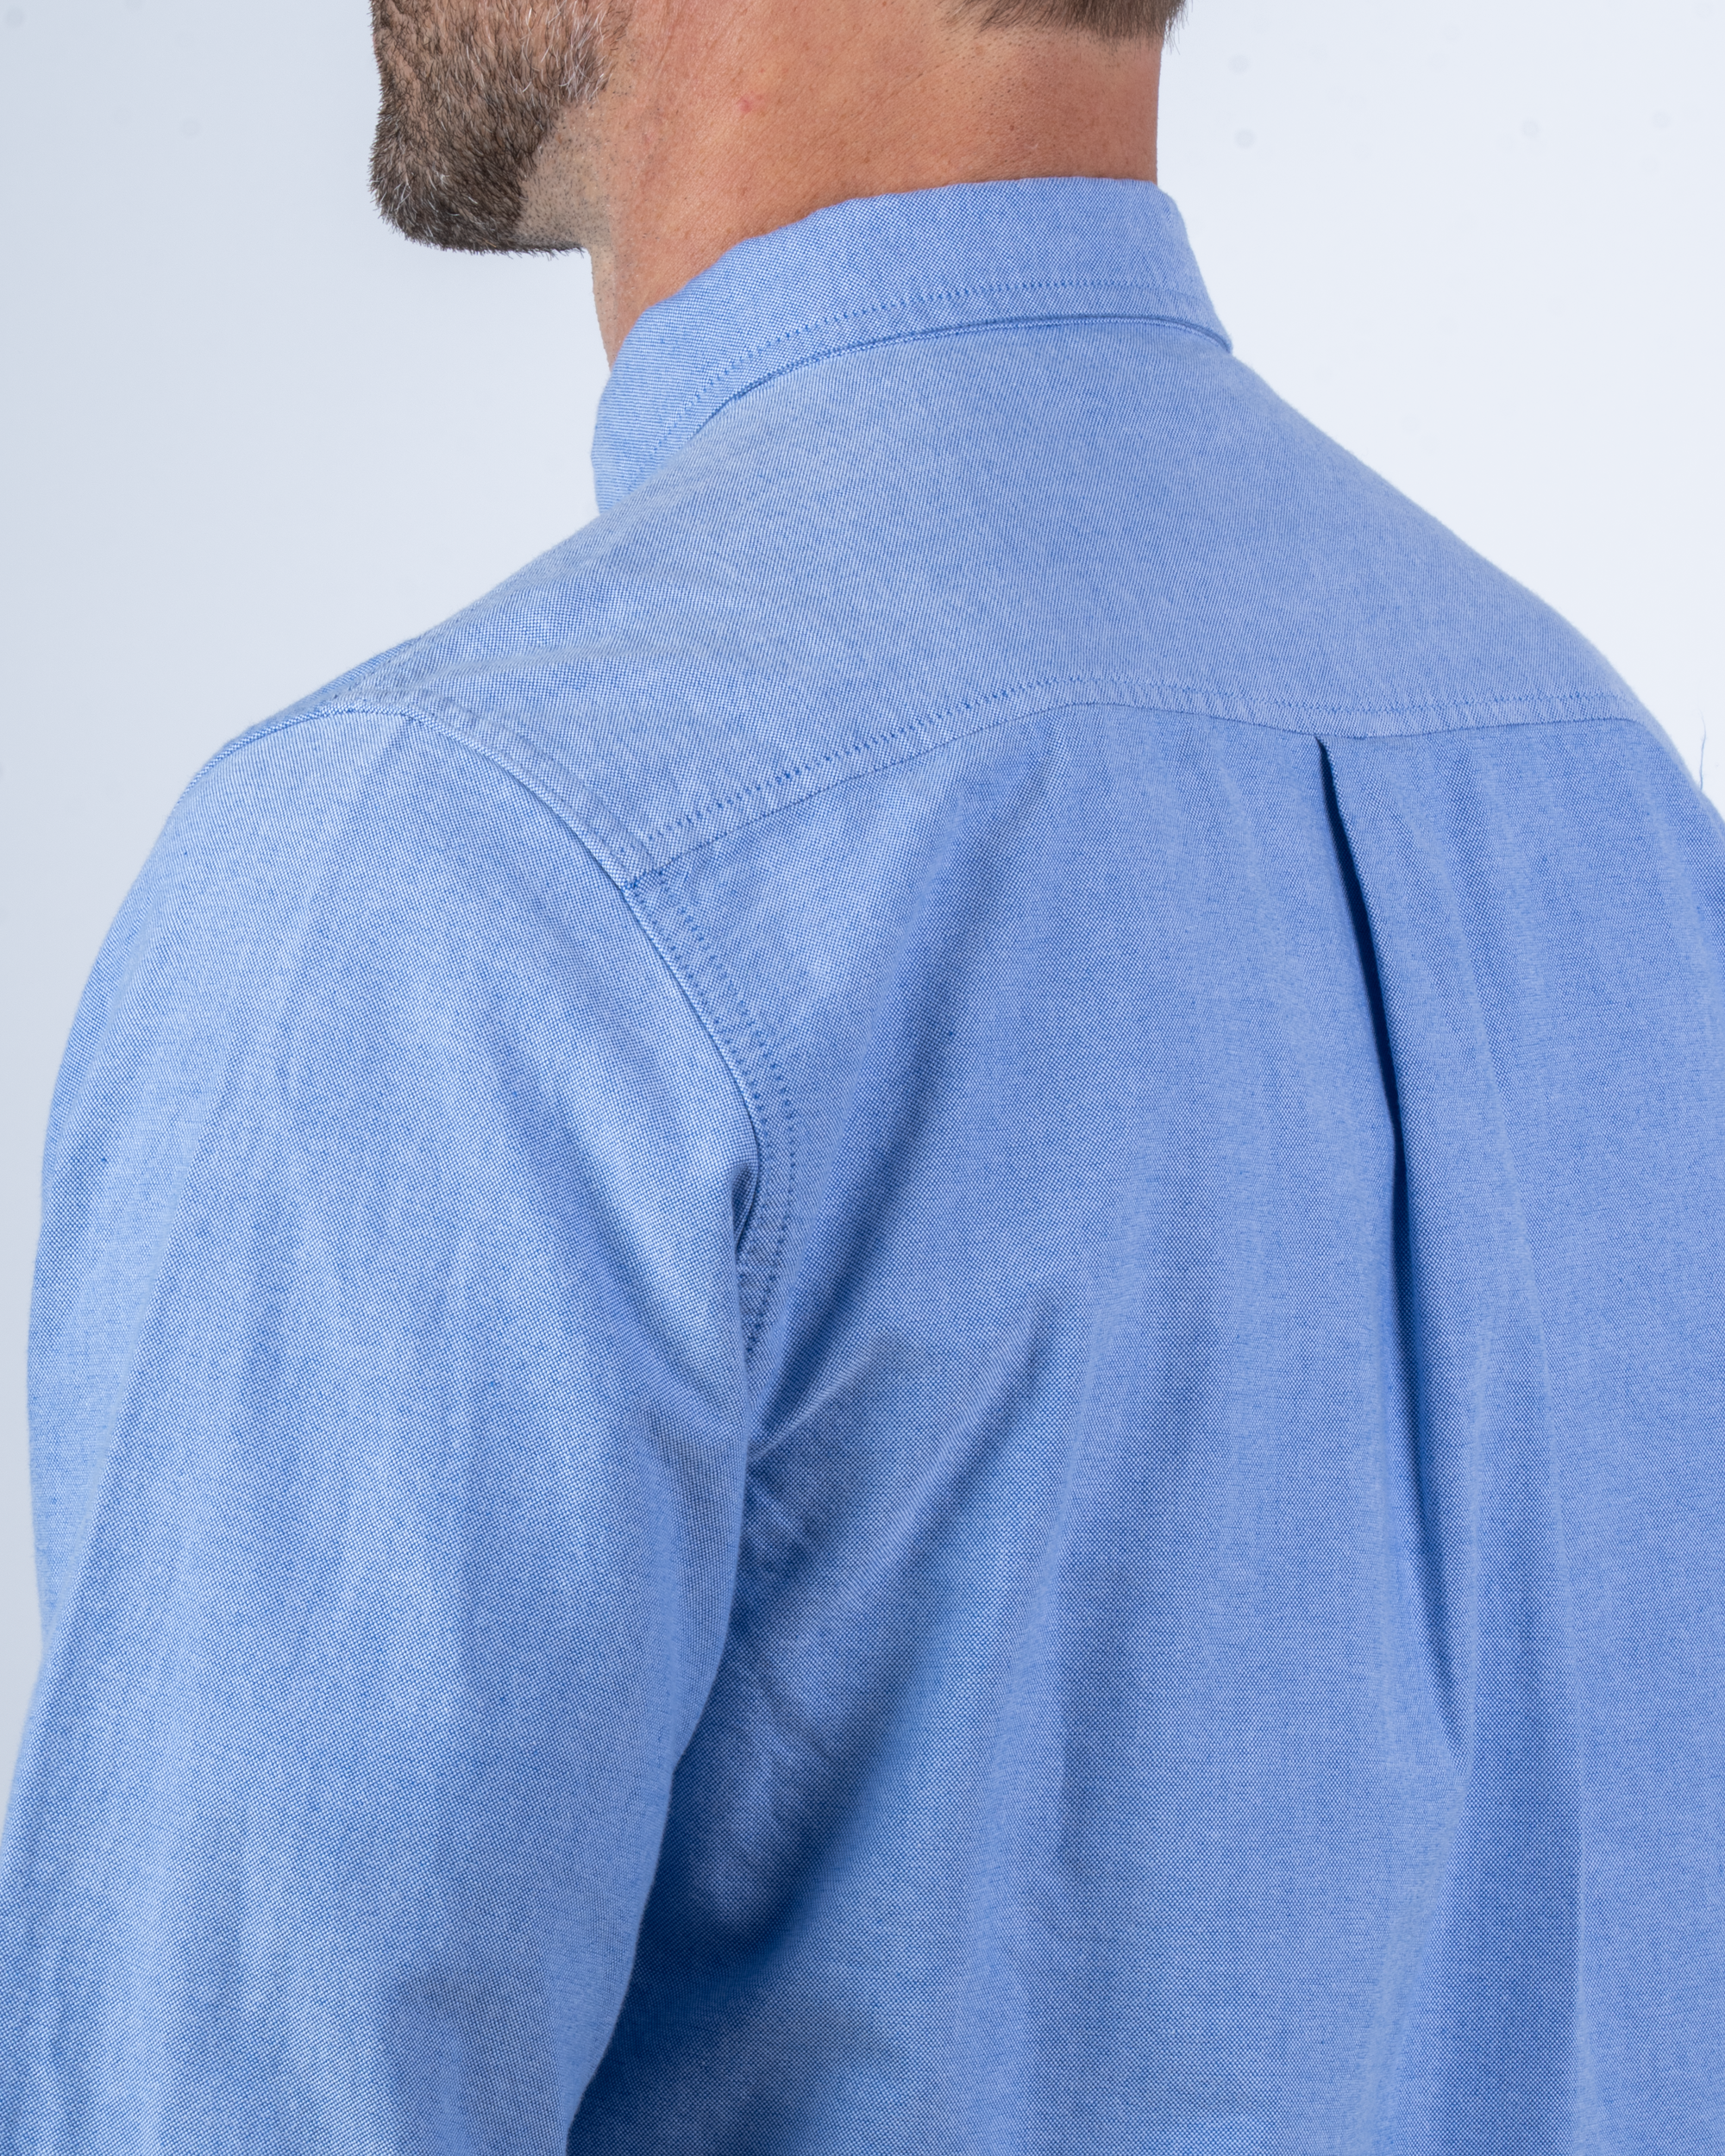 Foreign Rider Co Organic Cotton Blue Utility Button Down Oxford Back Shoulder and Neck Detail